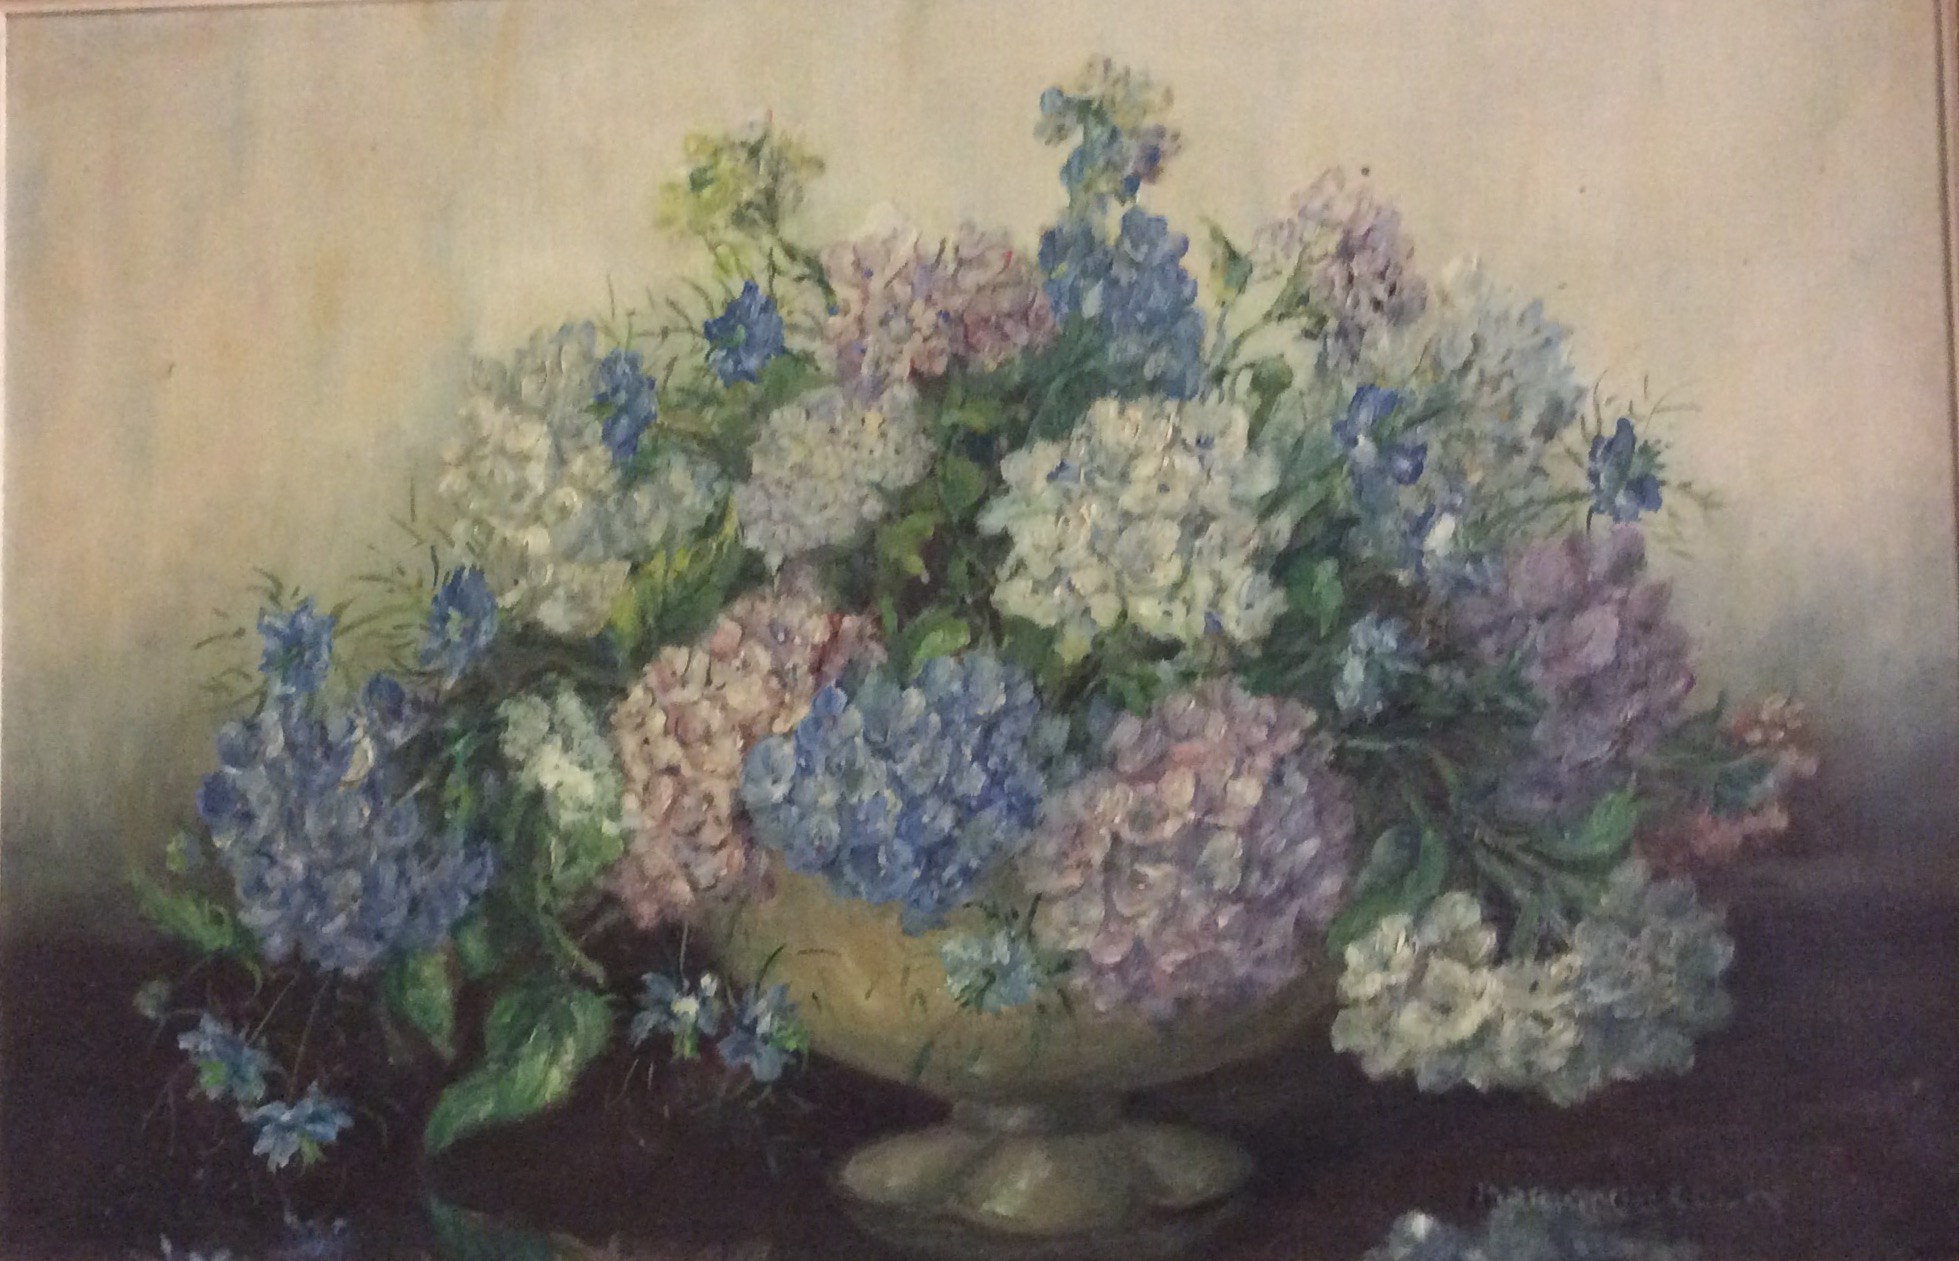 MARION BROOM, EXHIBITED 1925 - 1939, OIL ON CANVAS Still life, a basket of flowers, including